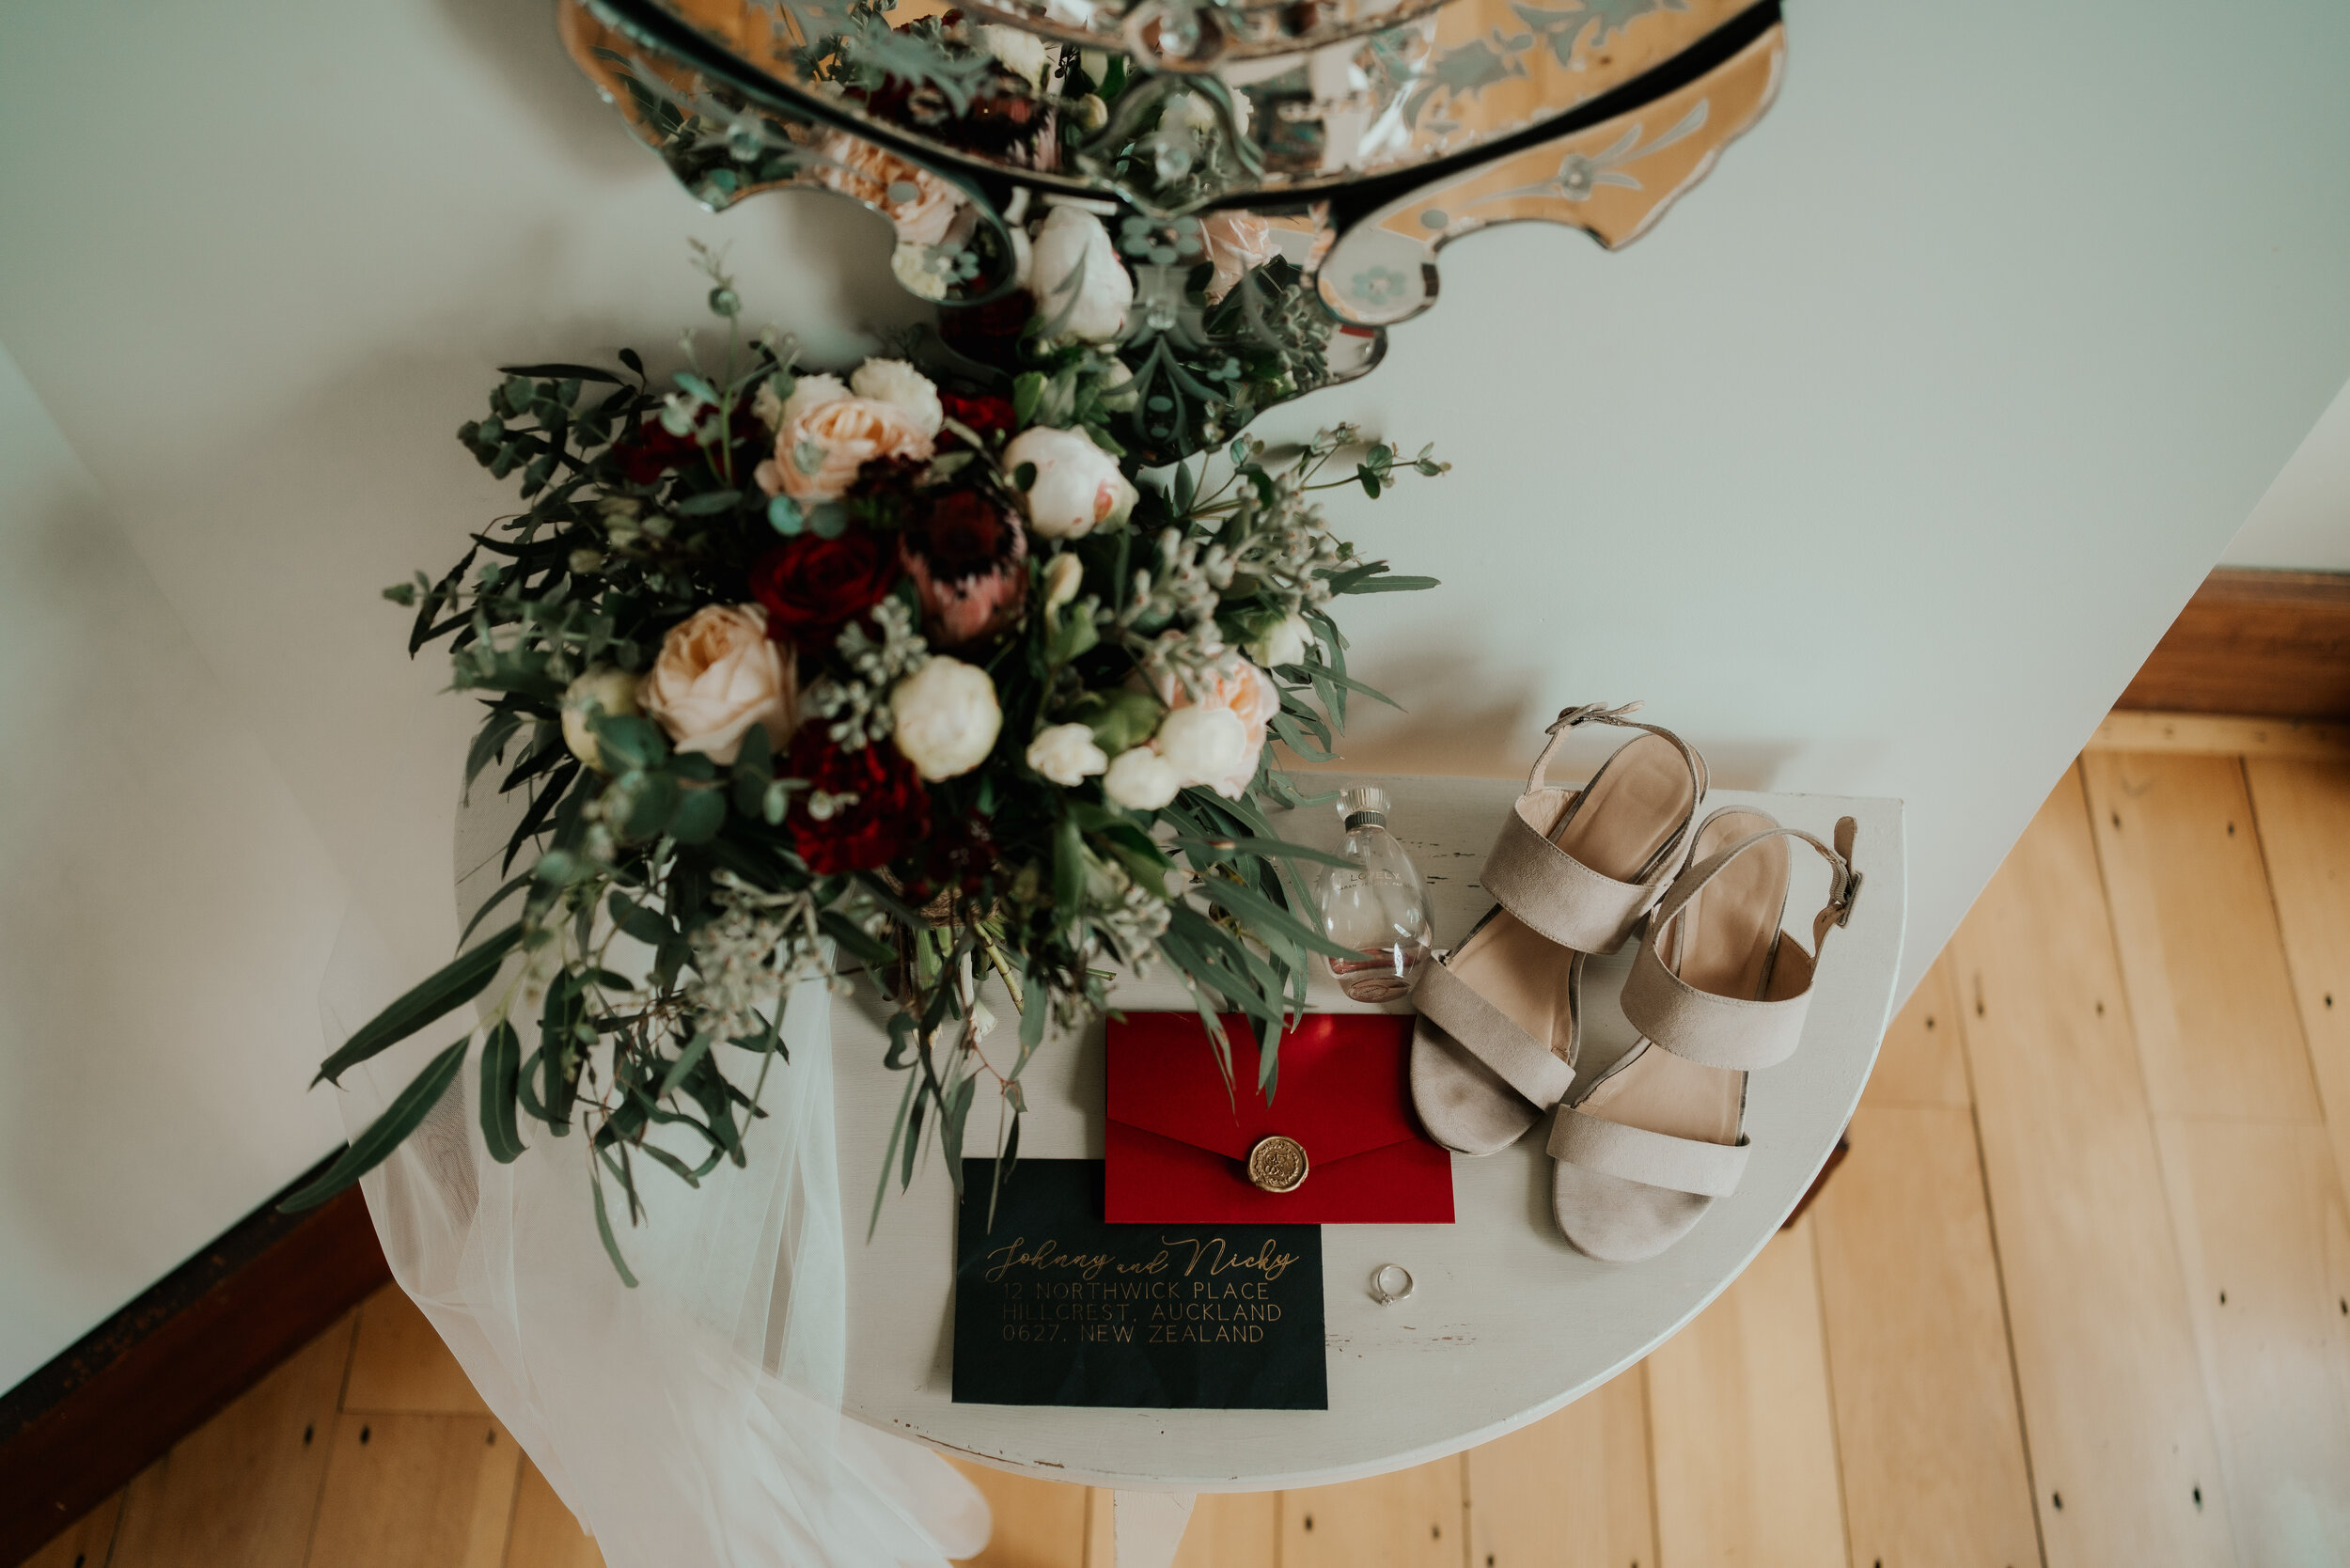 Wedding details including bouquet and stationery